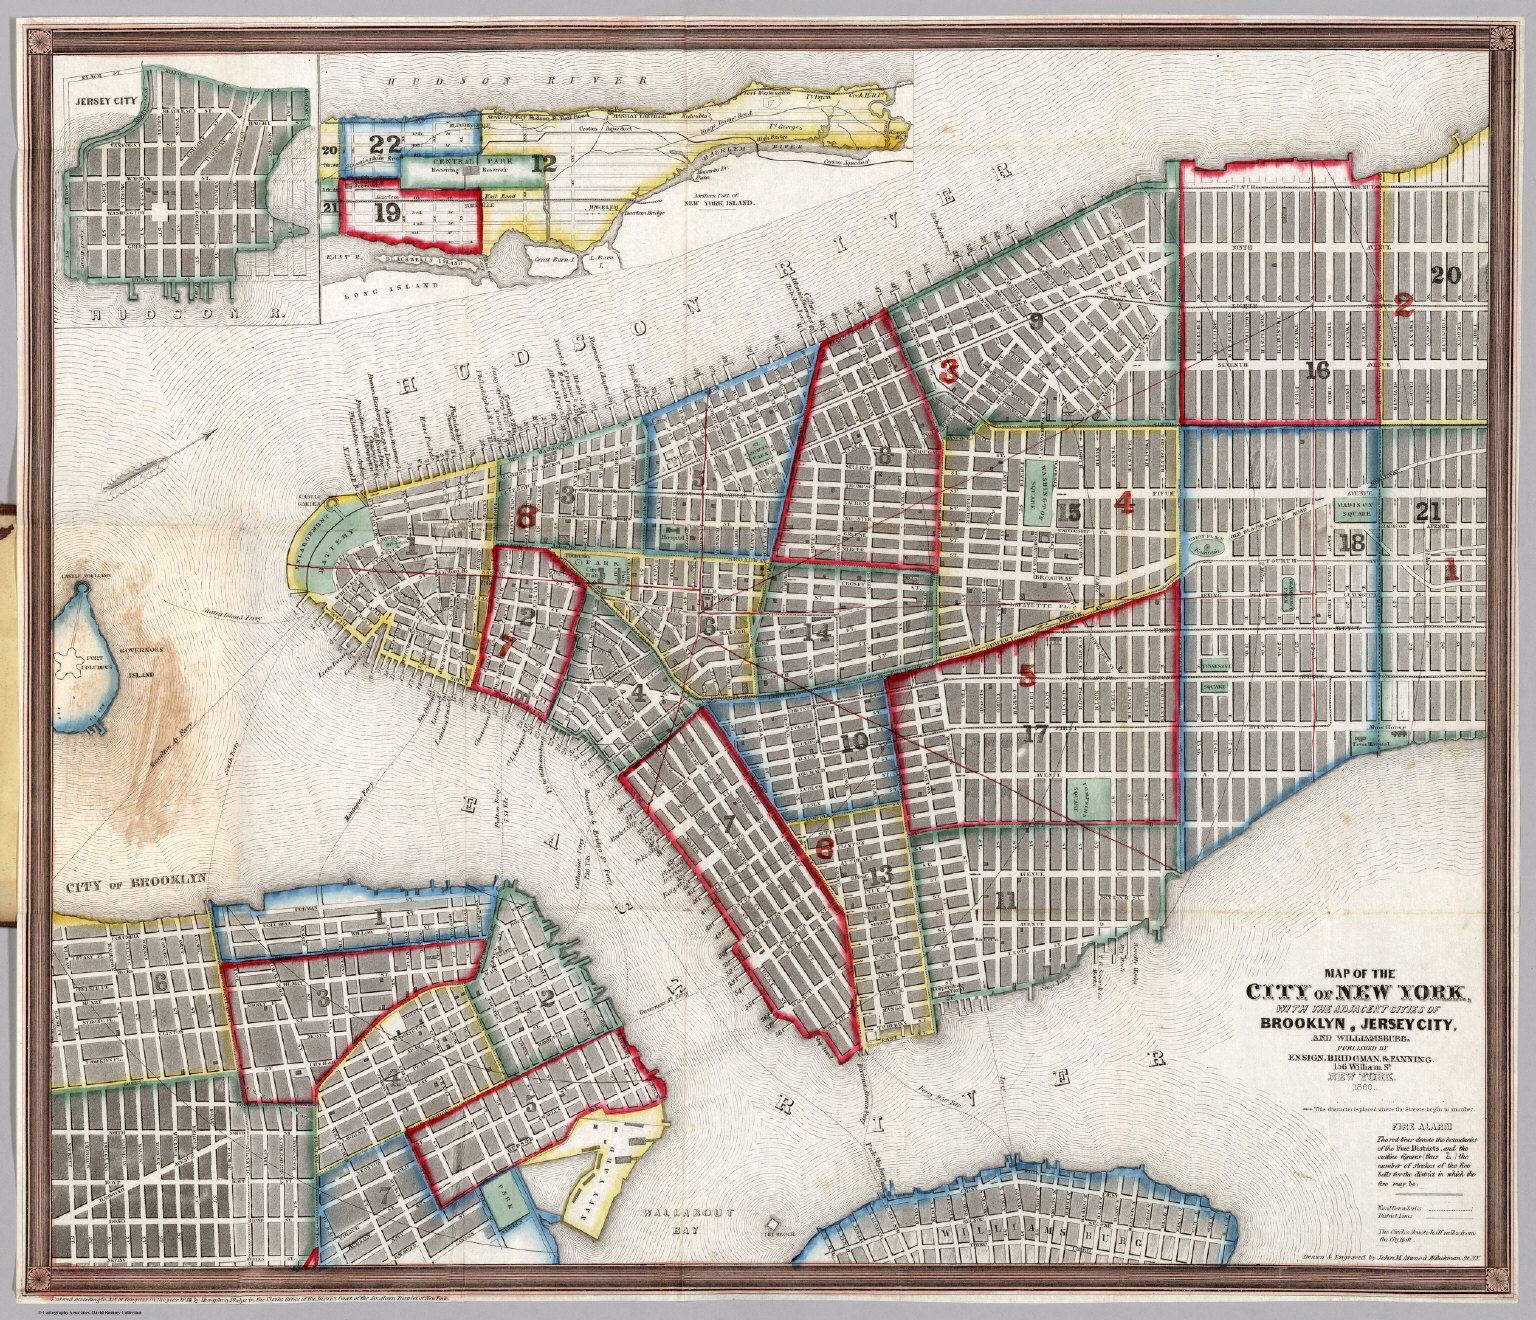 Map Of The City Of New York - David Rumsey Historical Map Collection